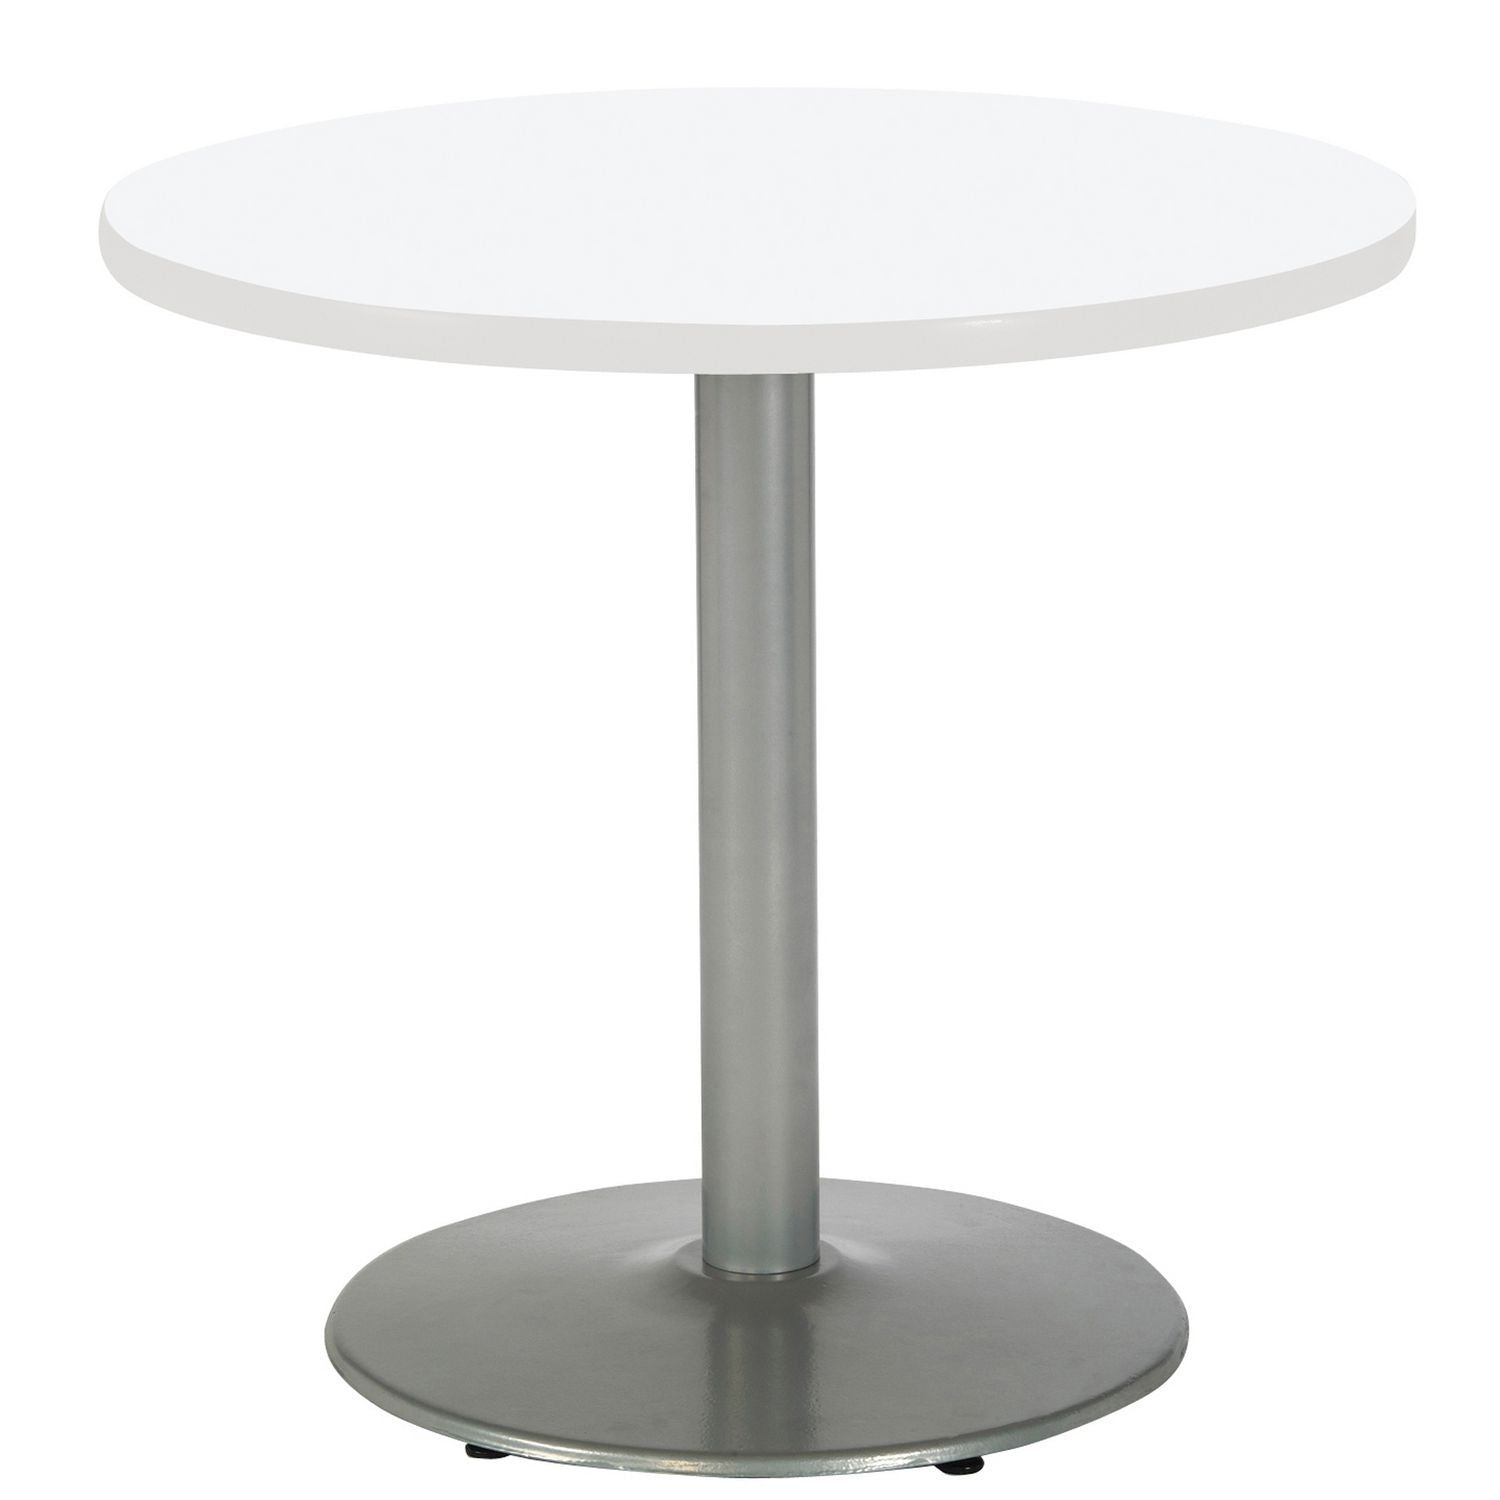 pedestal-table-with-four-black-kool-series-chairs-round-36-dia-x-29h-designer-white-ships-in-4-6-business-days_kfi811774036696 - 2